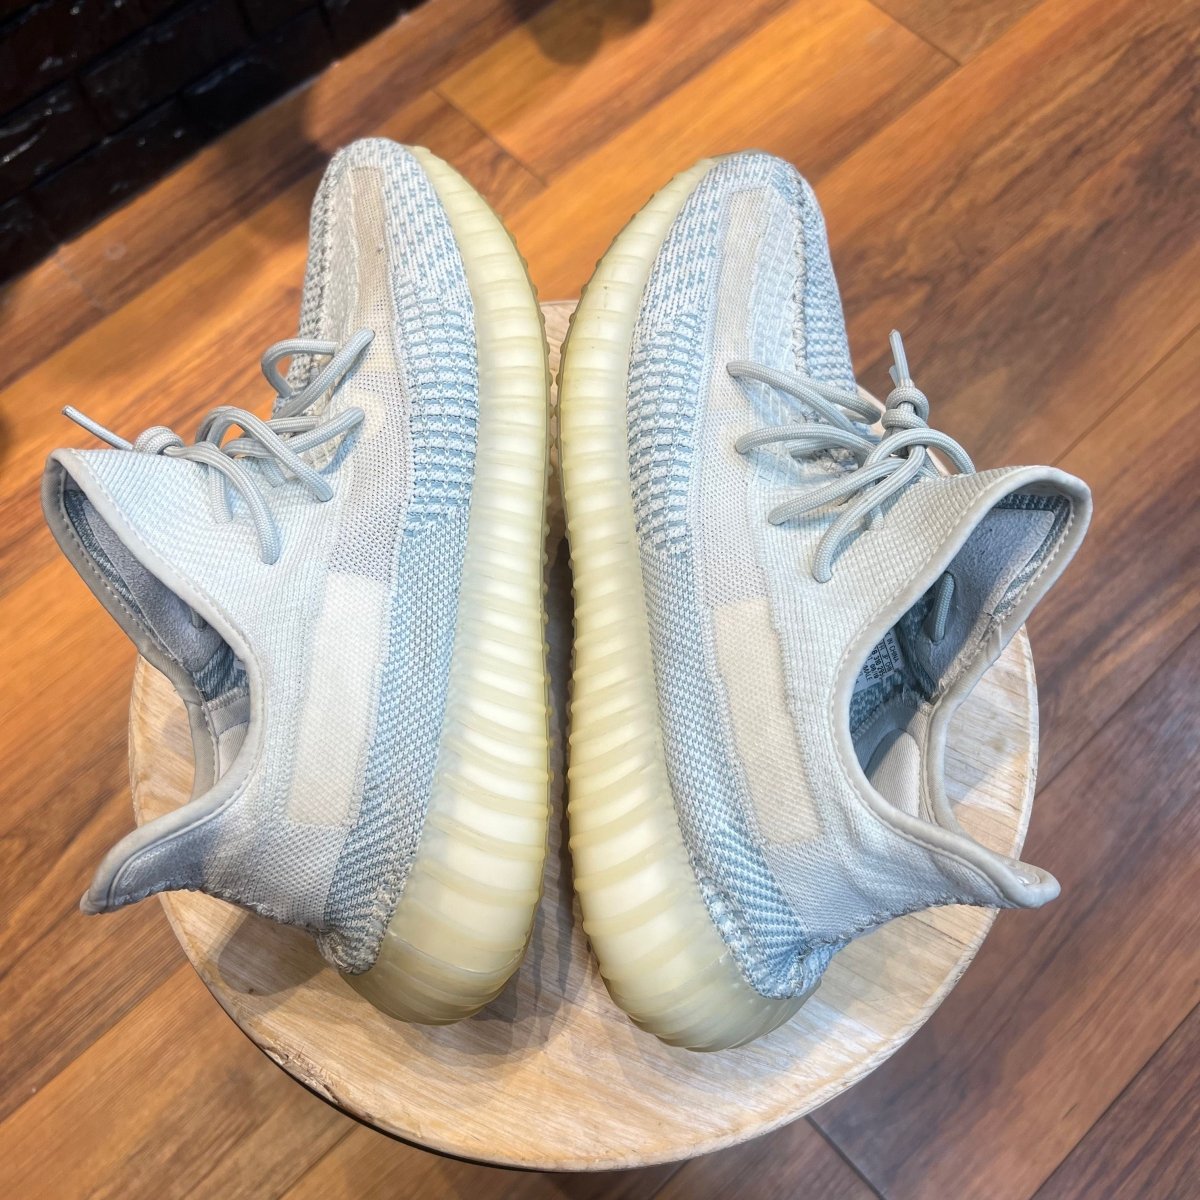 Yeezy Boost 350 V2 Cloud White Gently Enjoyed (Used) Men 13 - Rep Box - Low Sneaker - Yeezy - Jawns on Fire - sneakers